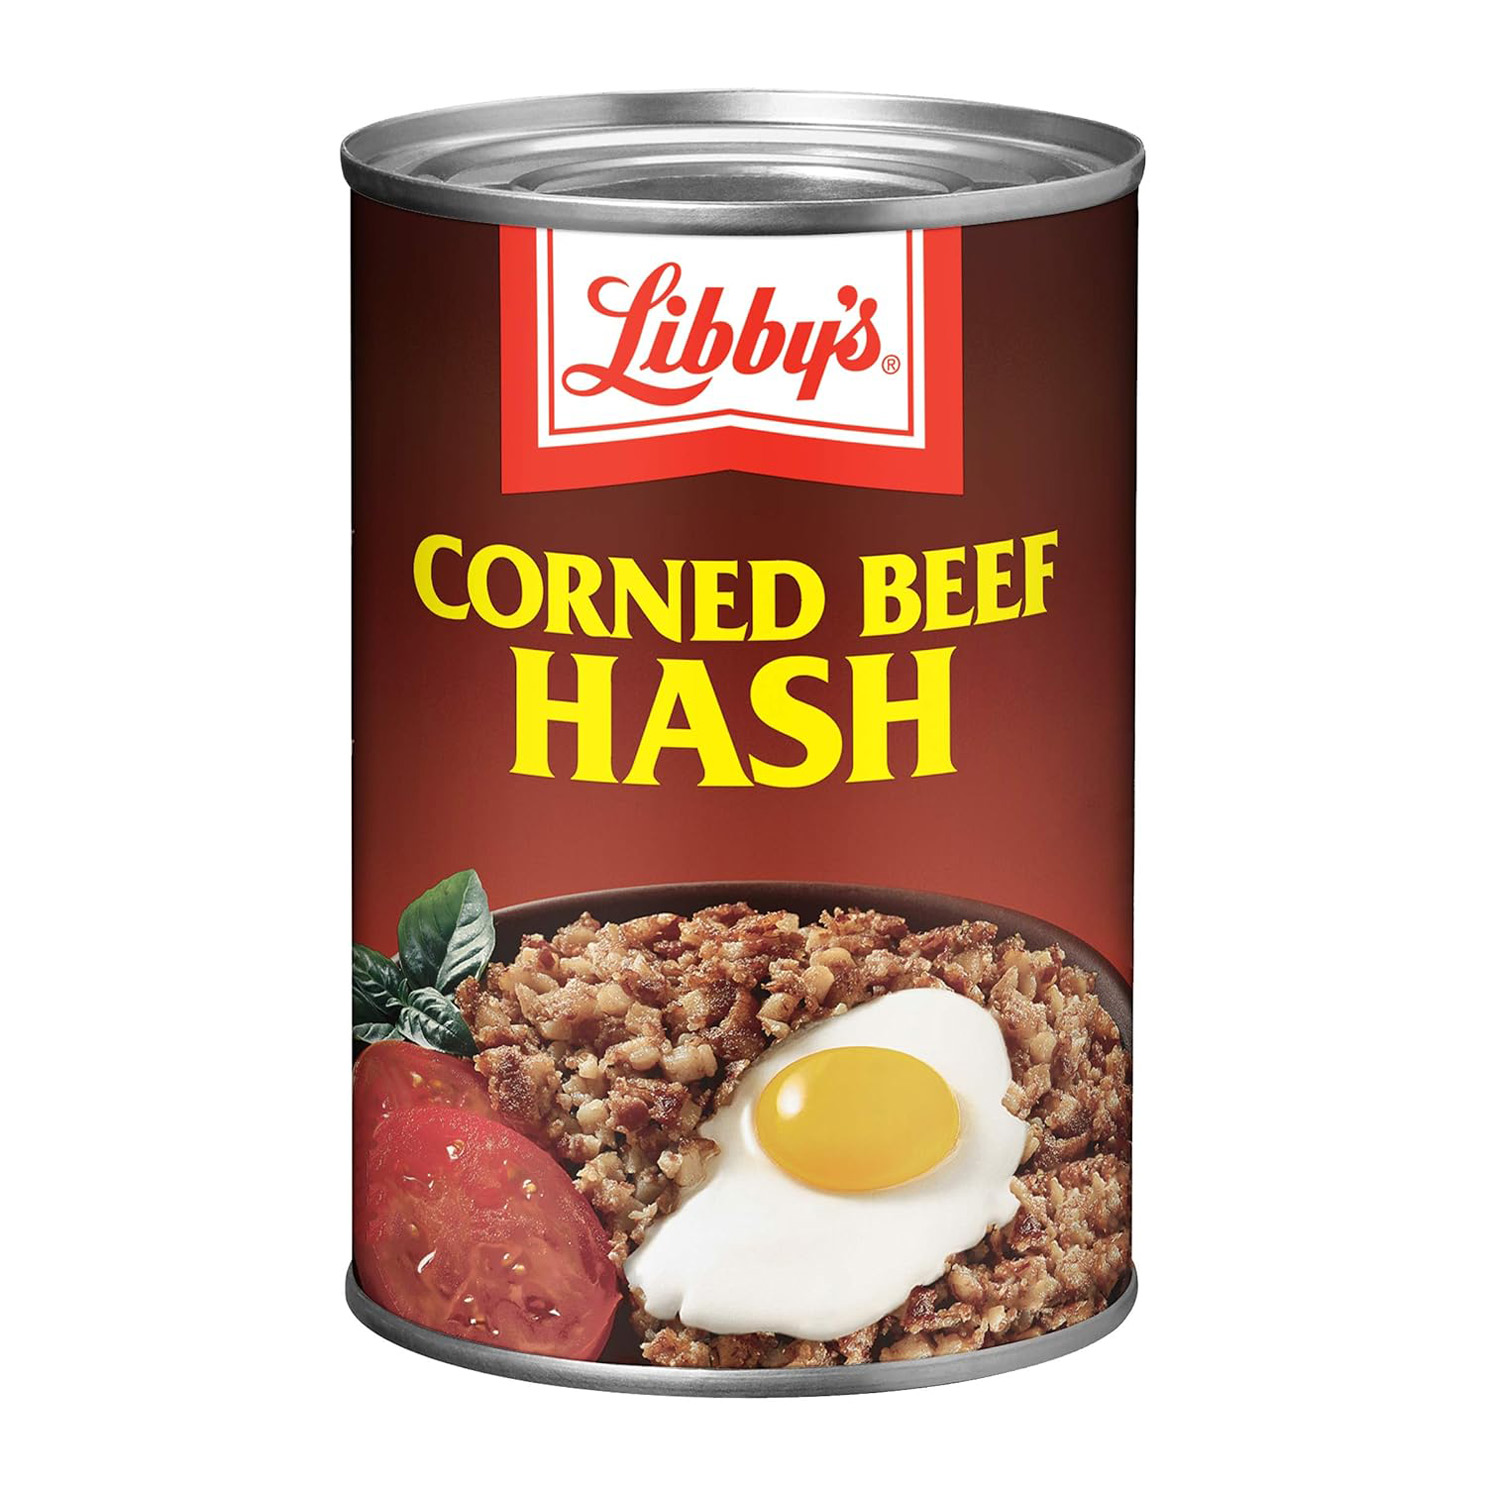 Libby’s Corned Beef Hash, 15 Ounce